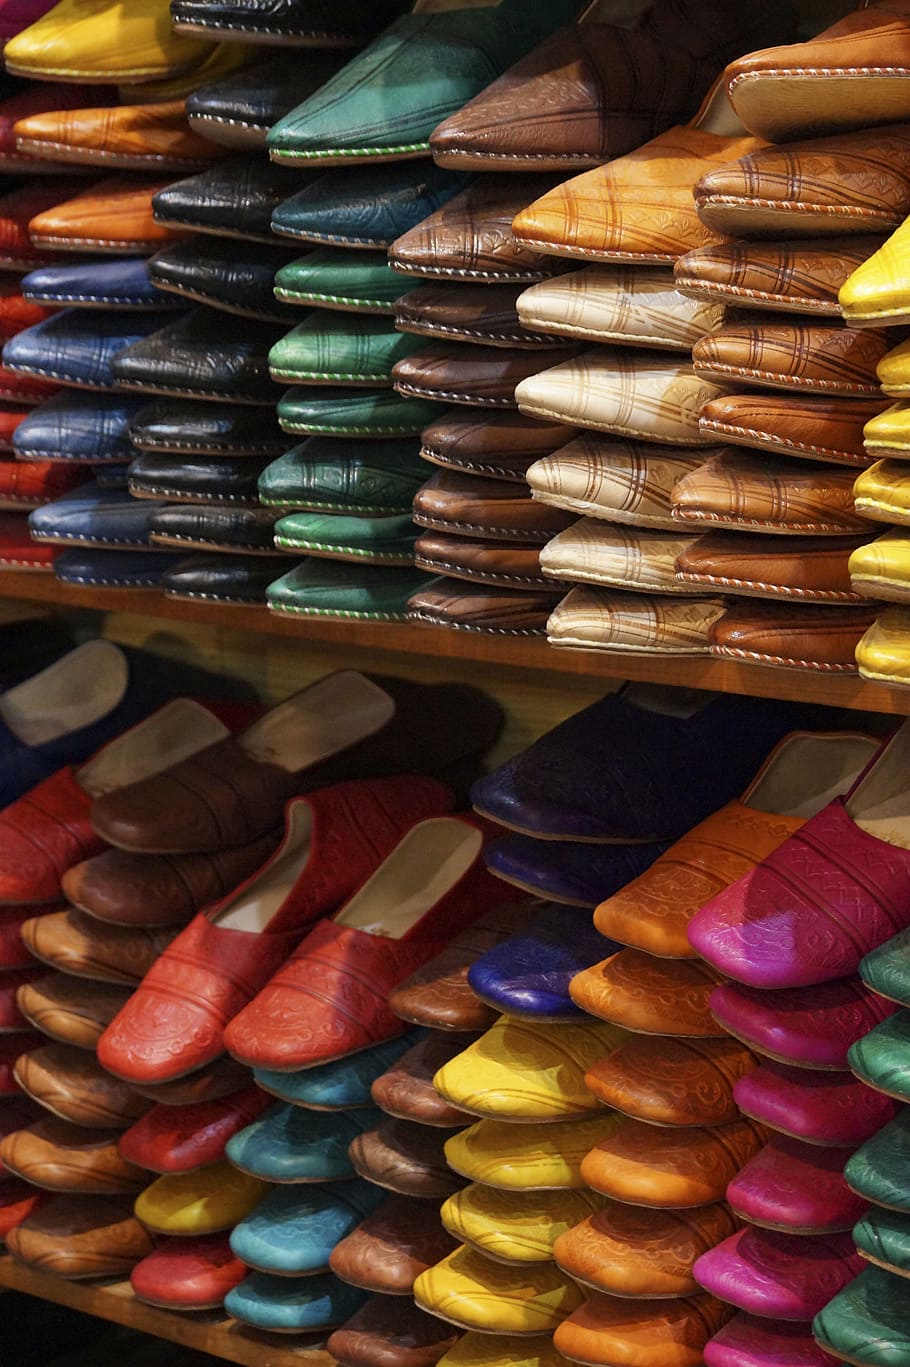 leather shoes, slippers, fes, morrocco, multi colored, choice, retail, arrangement, variation, large group of objects